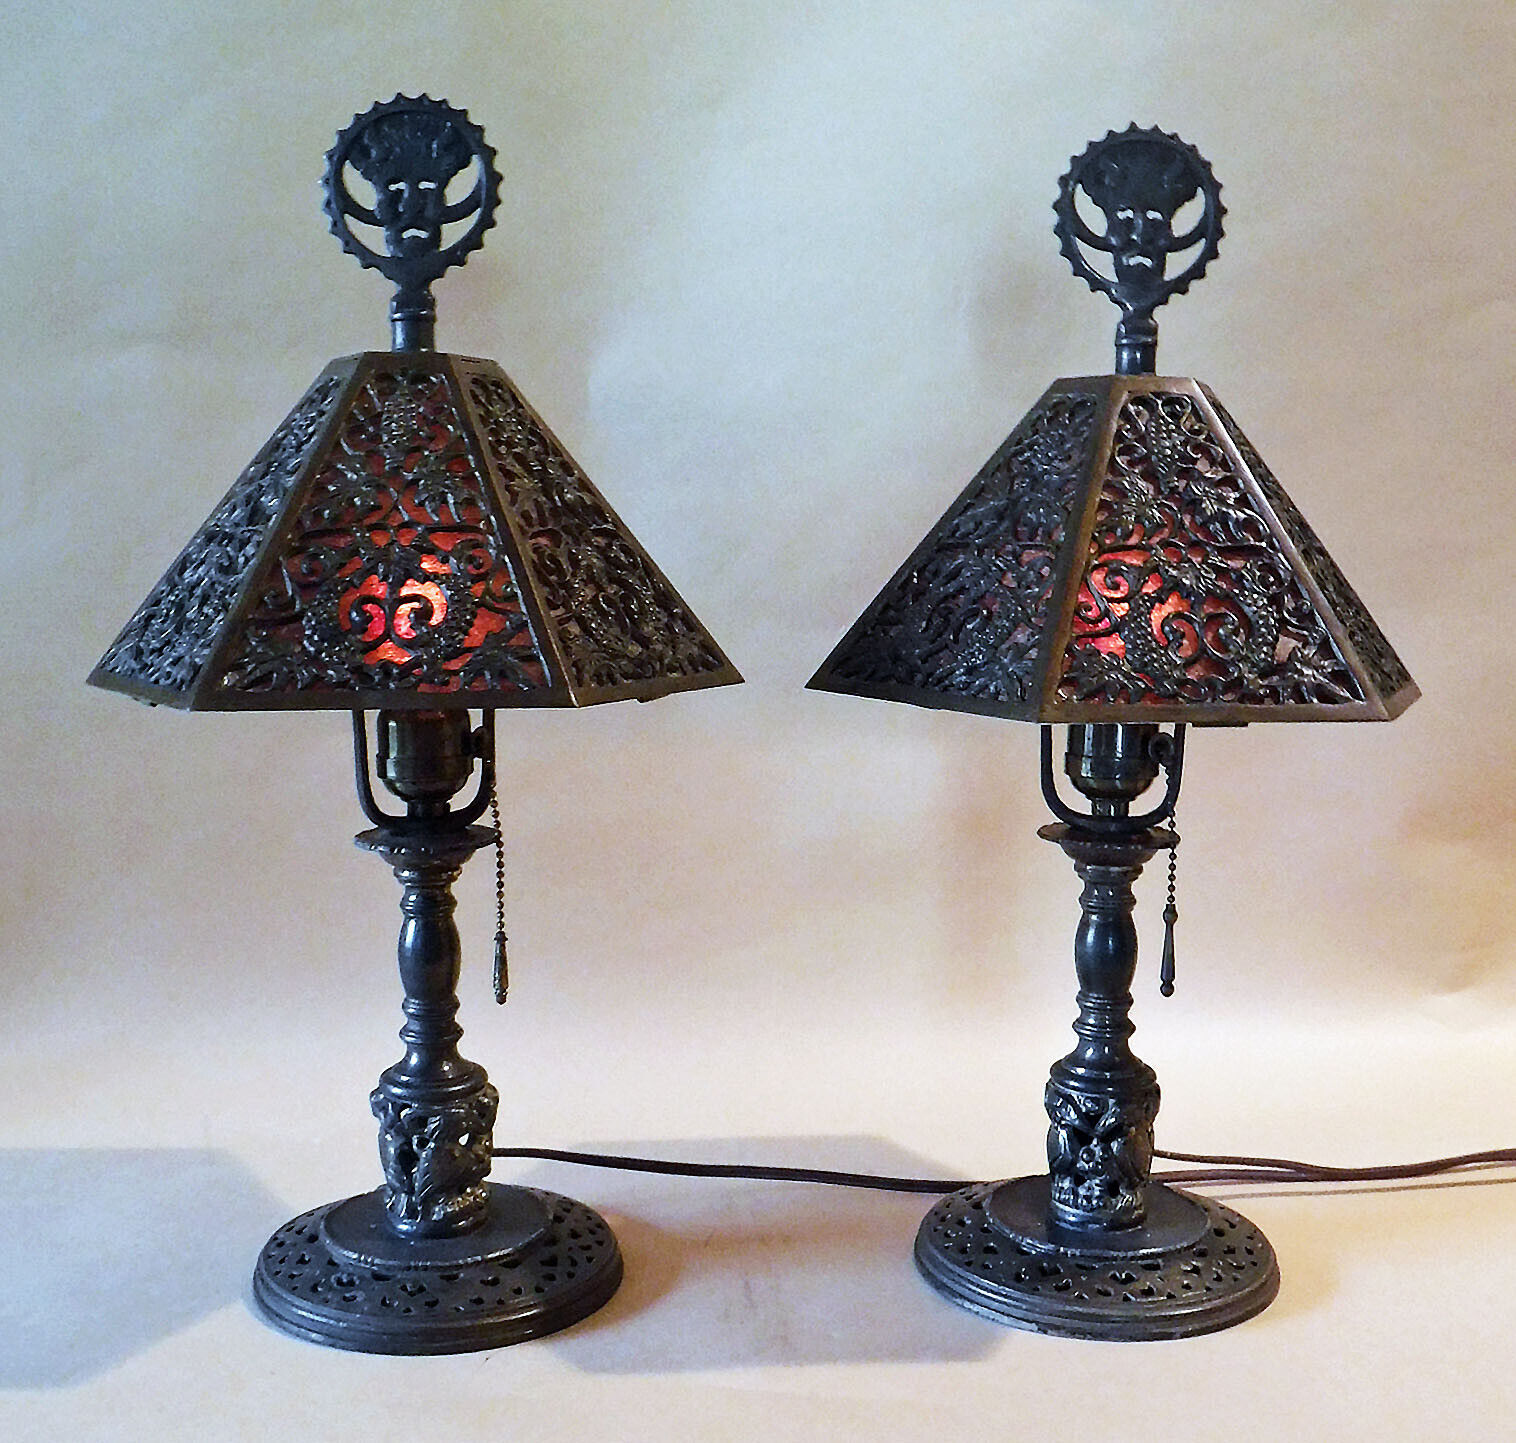 A PAIR OF SIGNED ANTIQUE OSCAR BACH BRONZE BOUDOIR ACCENT LAMPS COMEDY & TRAGEDY